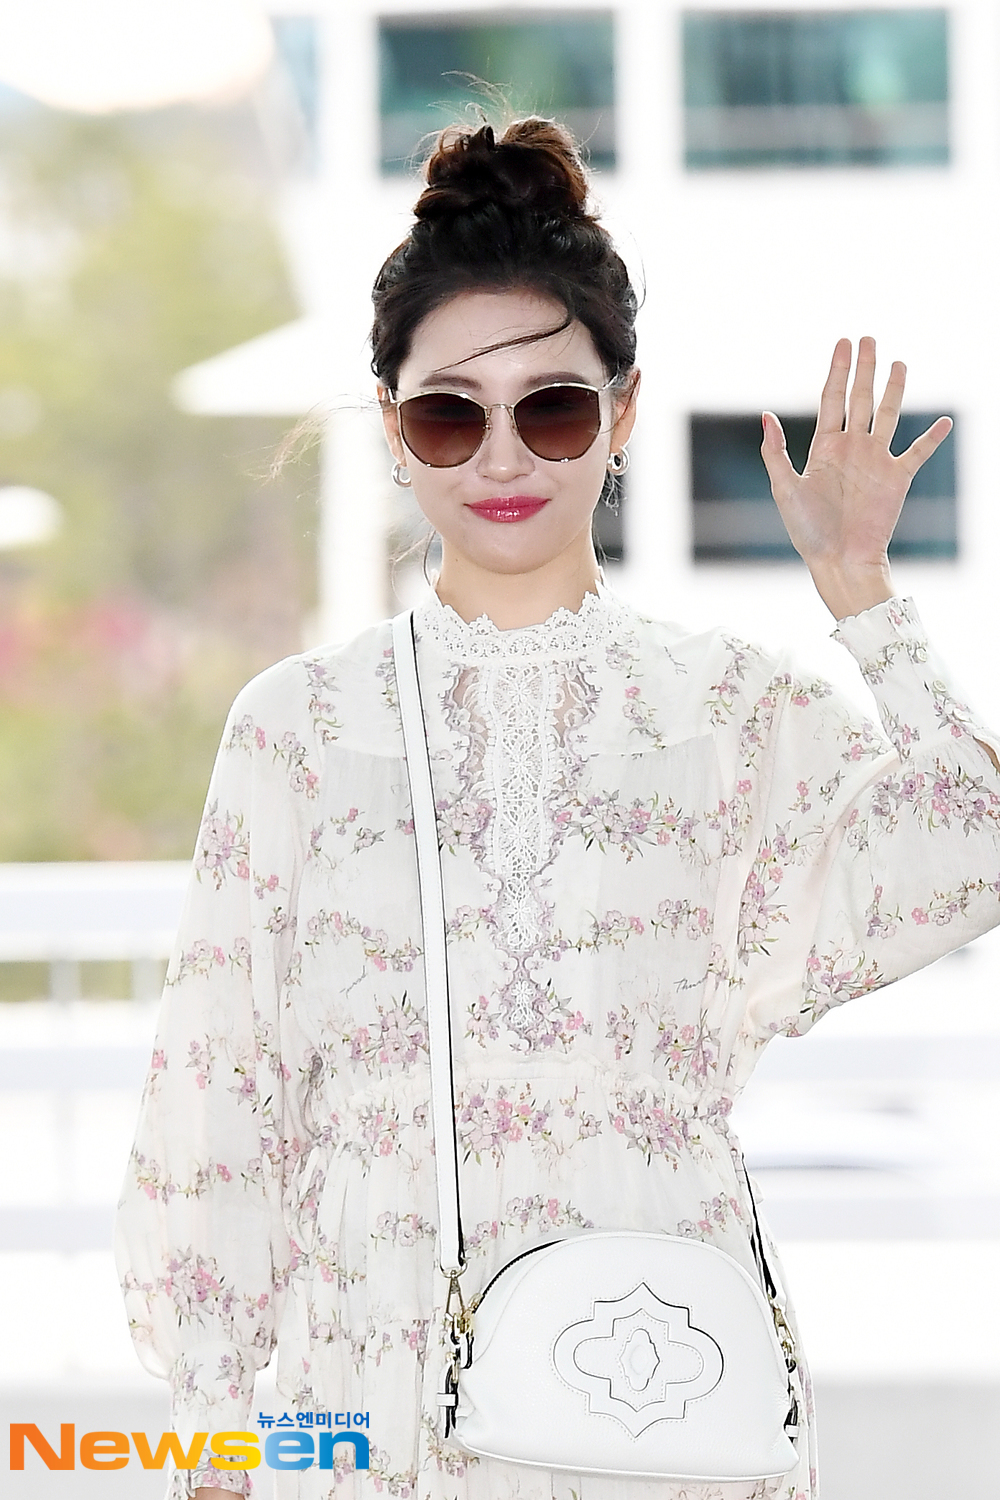 Singer Sunmi (SUNMI) departed for United States of America Los Angeles, a photo shoot car, on April 26 at the Incheon International Airport in Unseo-dong, Jung-gu, Incheon.Singer Sunmi (SUNMI) is leaving for United States of America Los Angeles with an airport fashion show.exponential earthquake